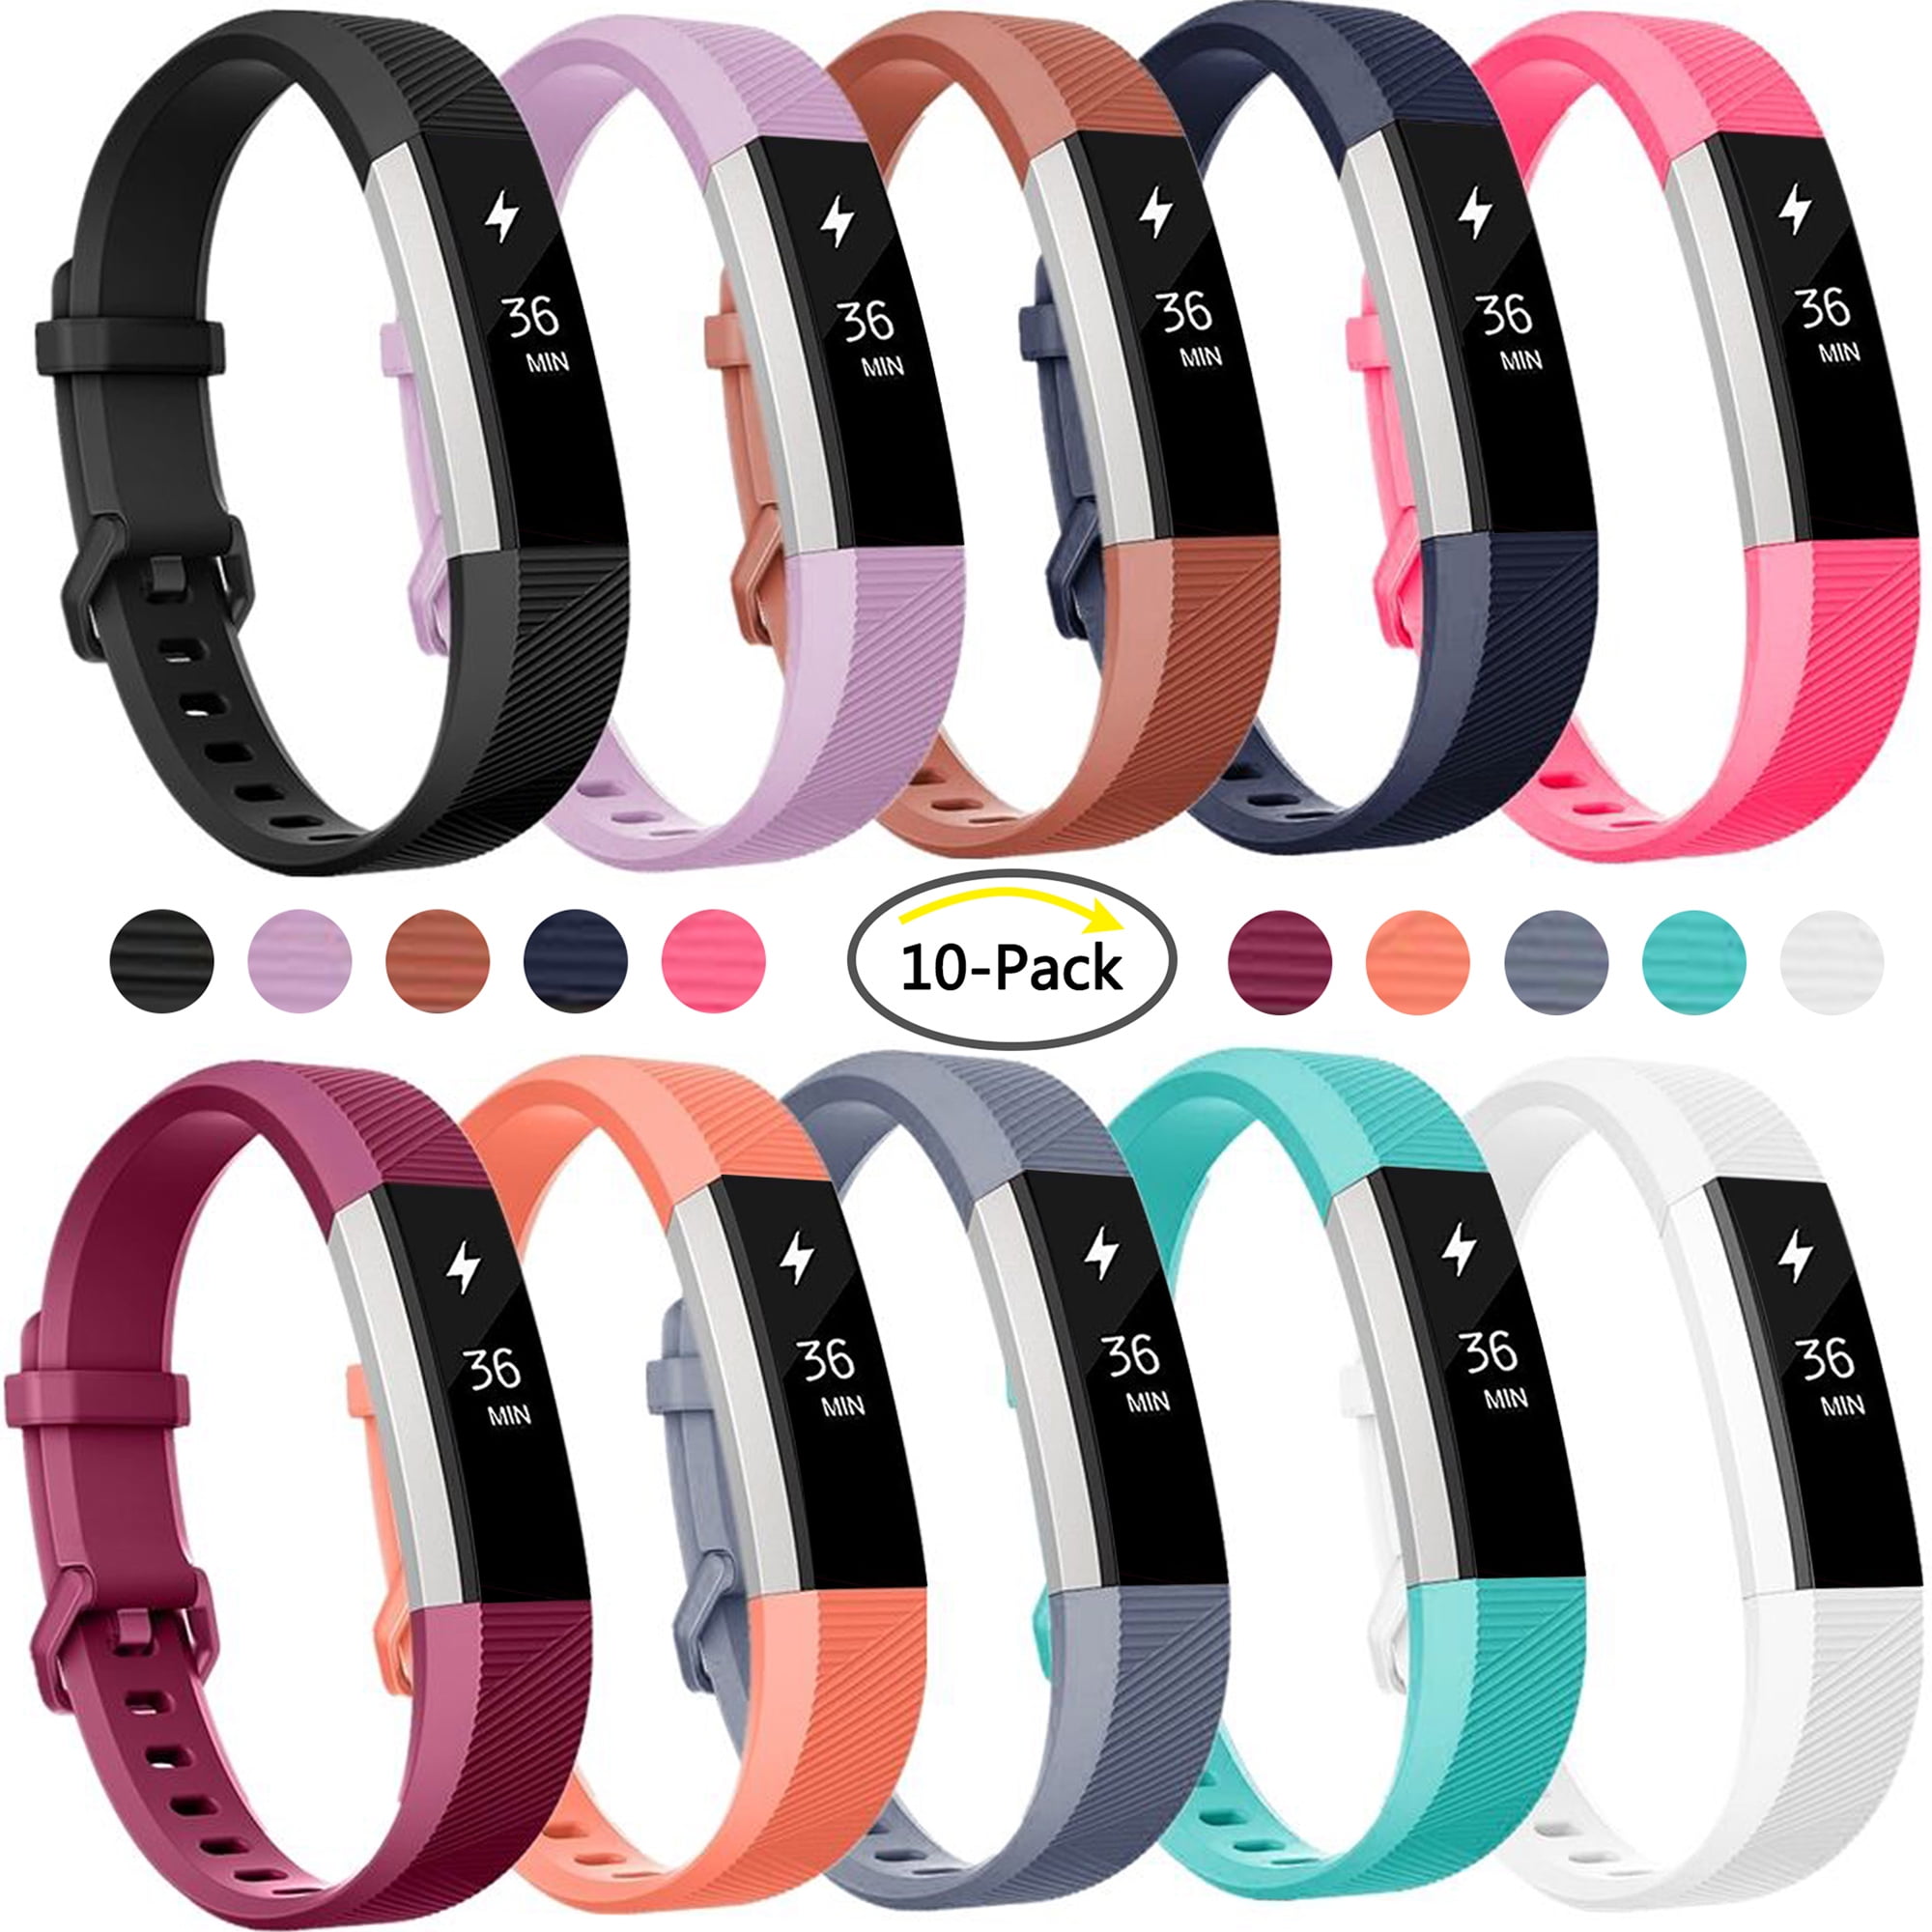 Sports Silicone Replacement Wrist Band Buckle Strap Bracelet For Fitbit Alta HR 